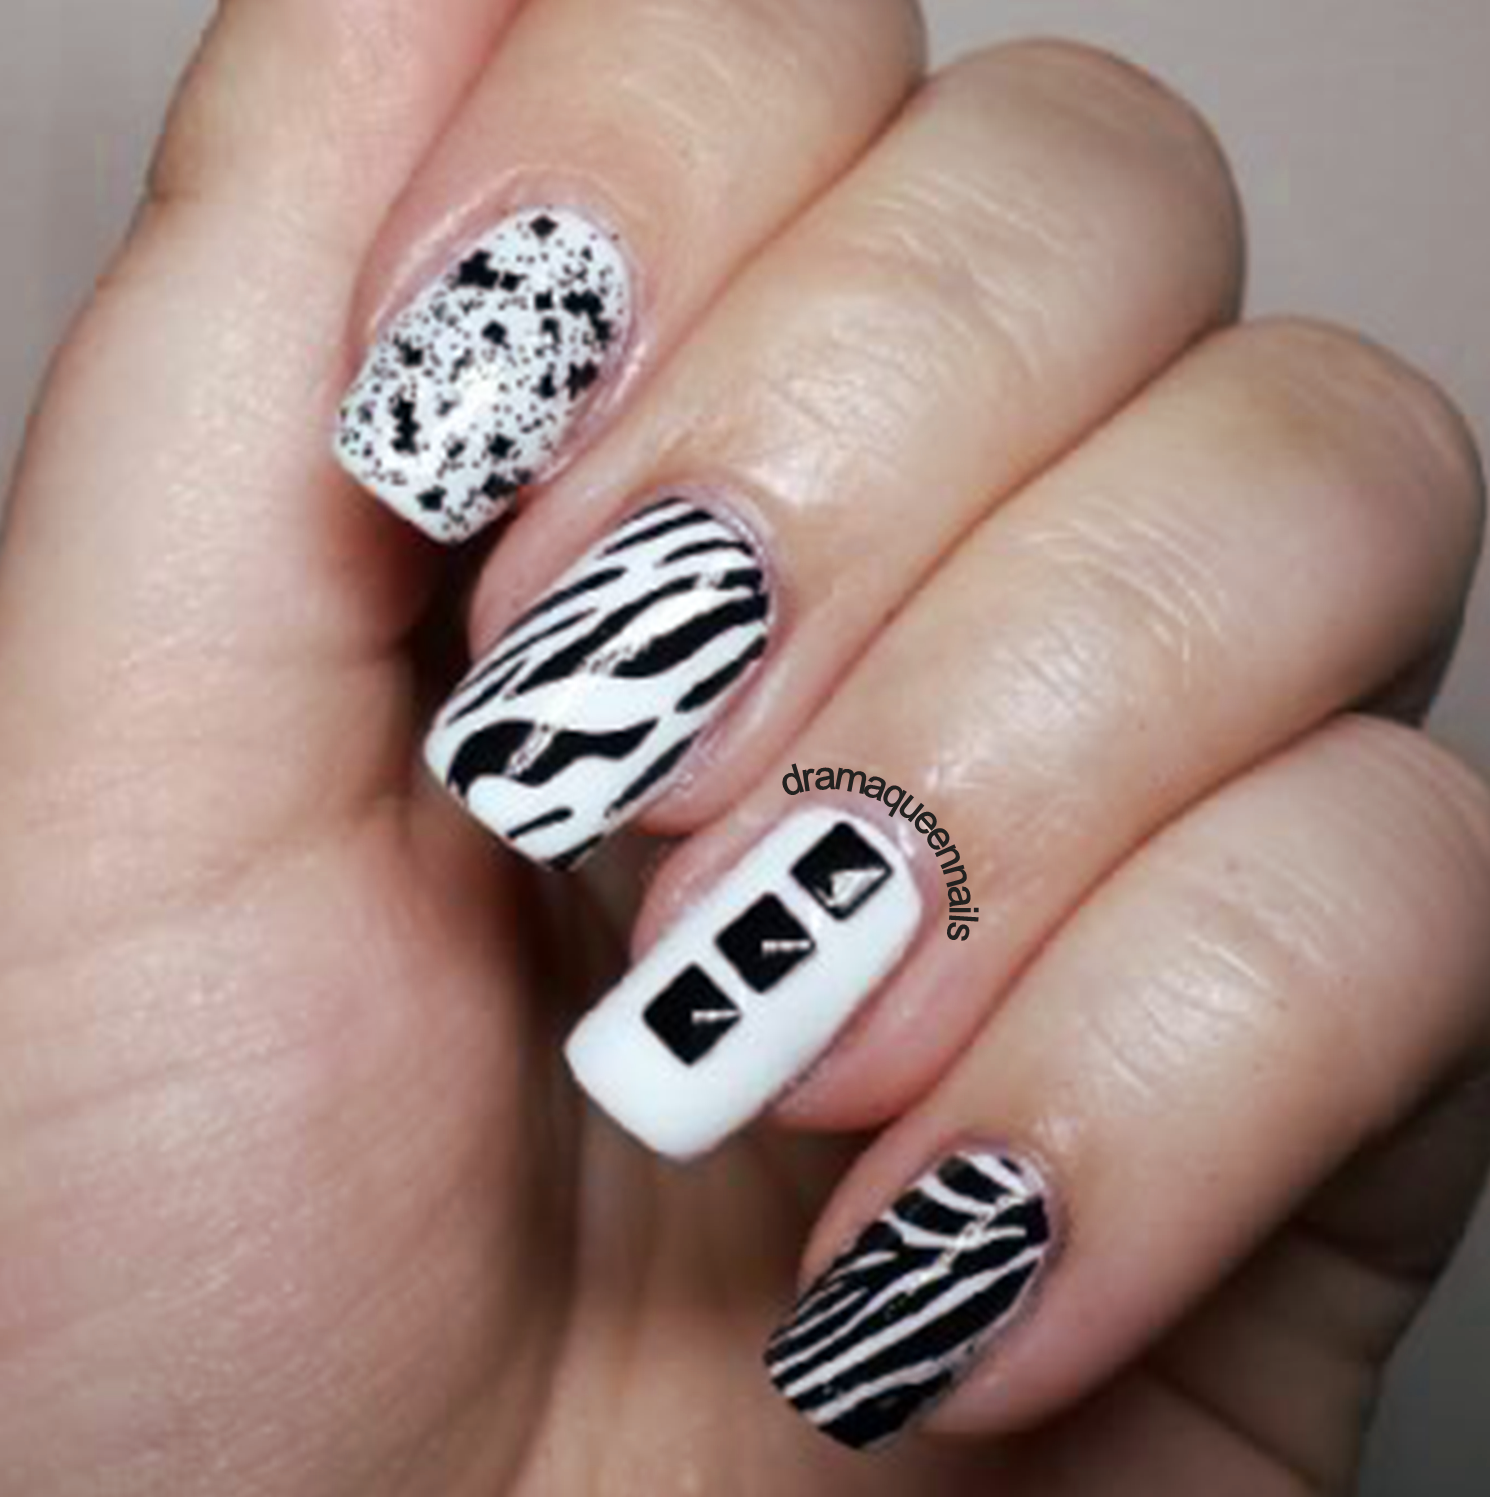 Drama Queen Nails: #31dc2013 - Day 7: Black and White